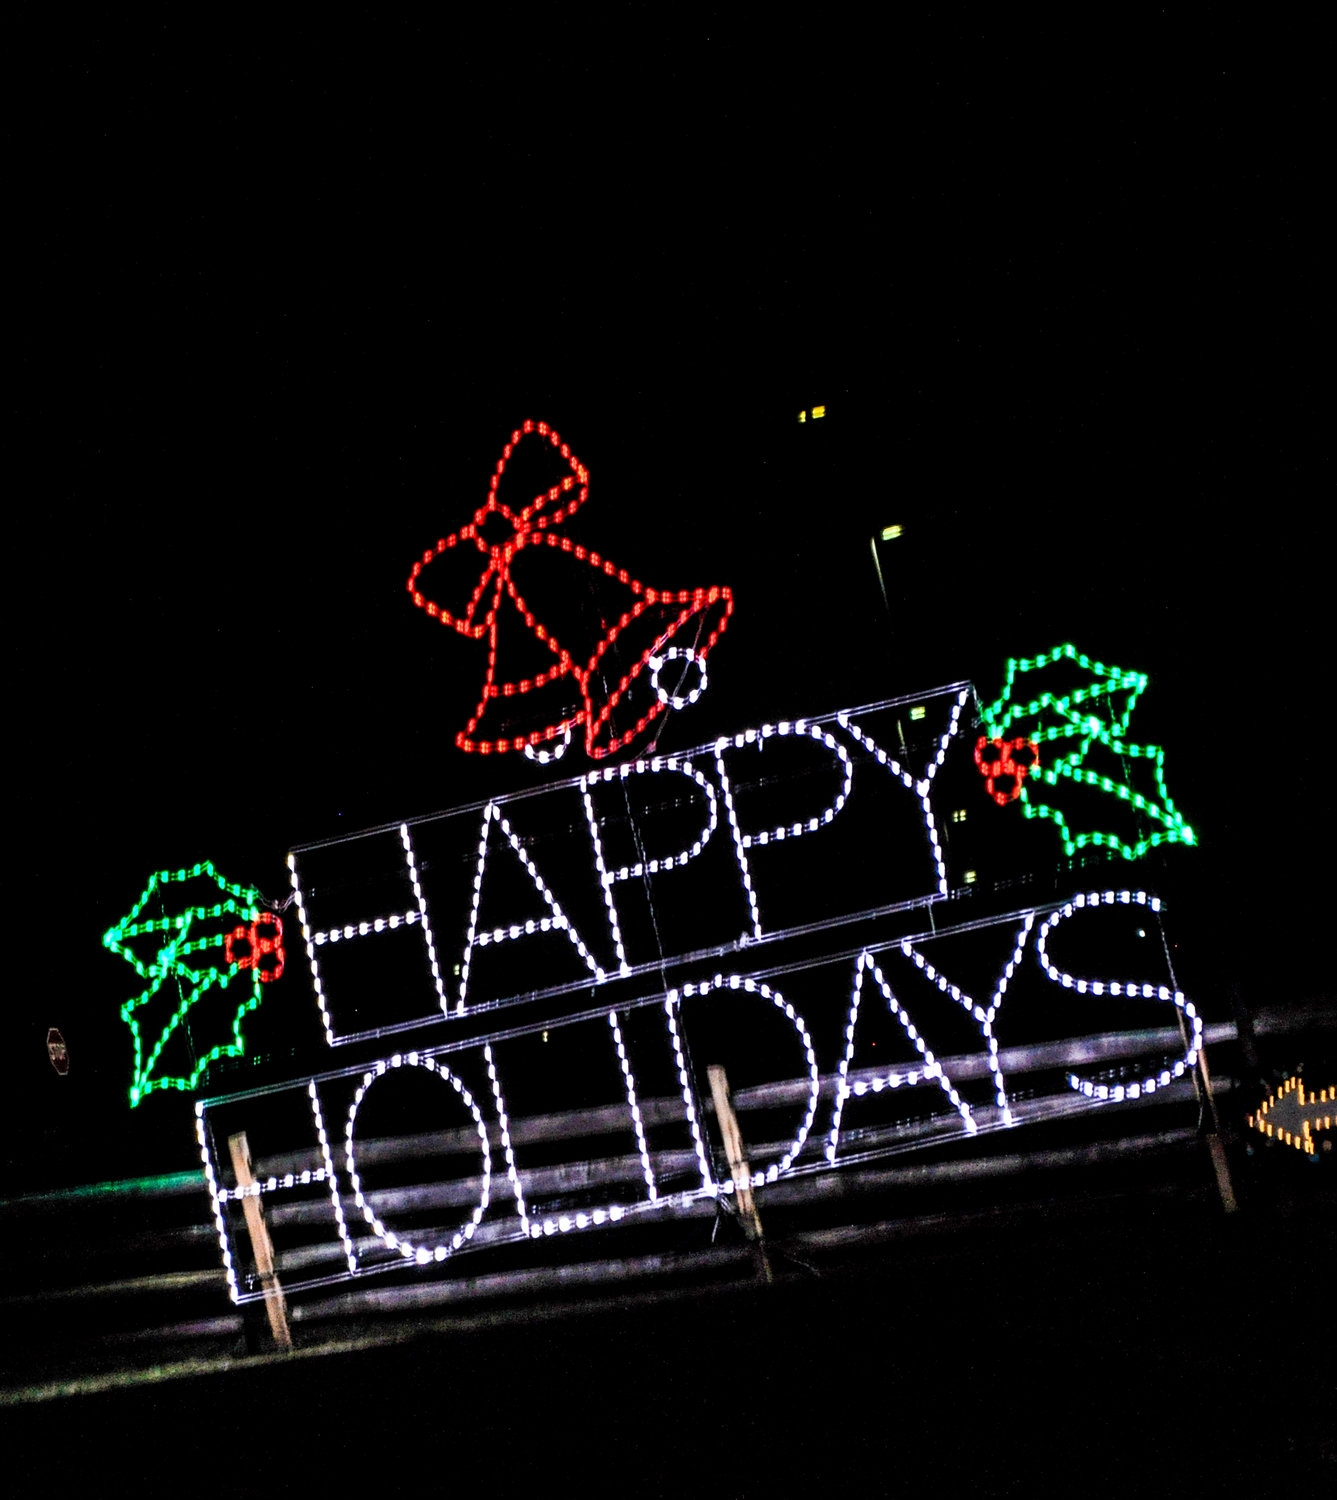 For more photos of "Peace, Love &Lights" at Bethel Woods, like the River Reporter on Facebook and follow us on Instagram and Twitter.